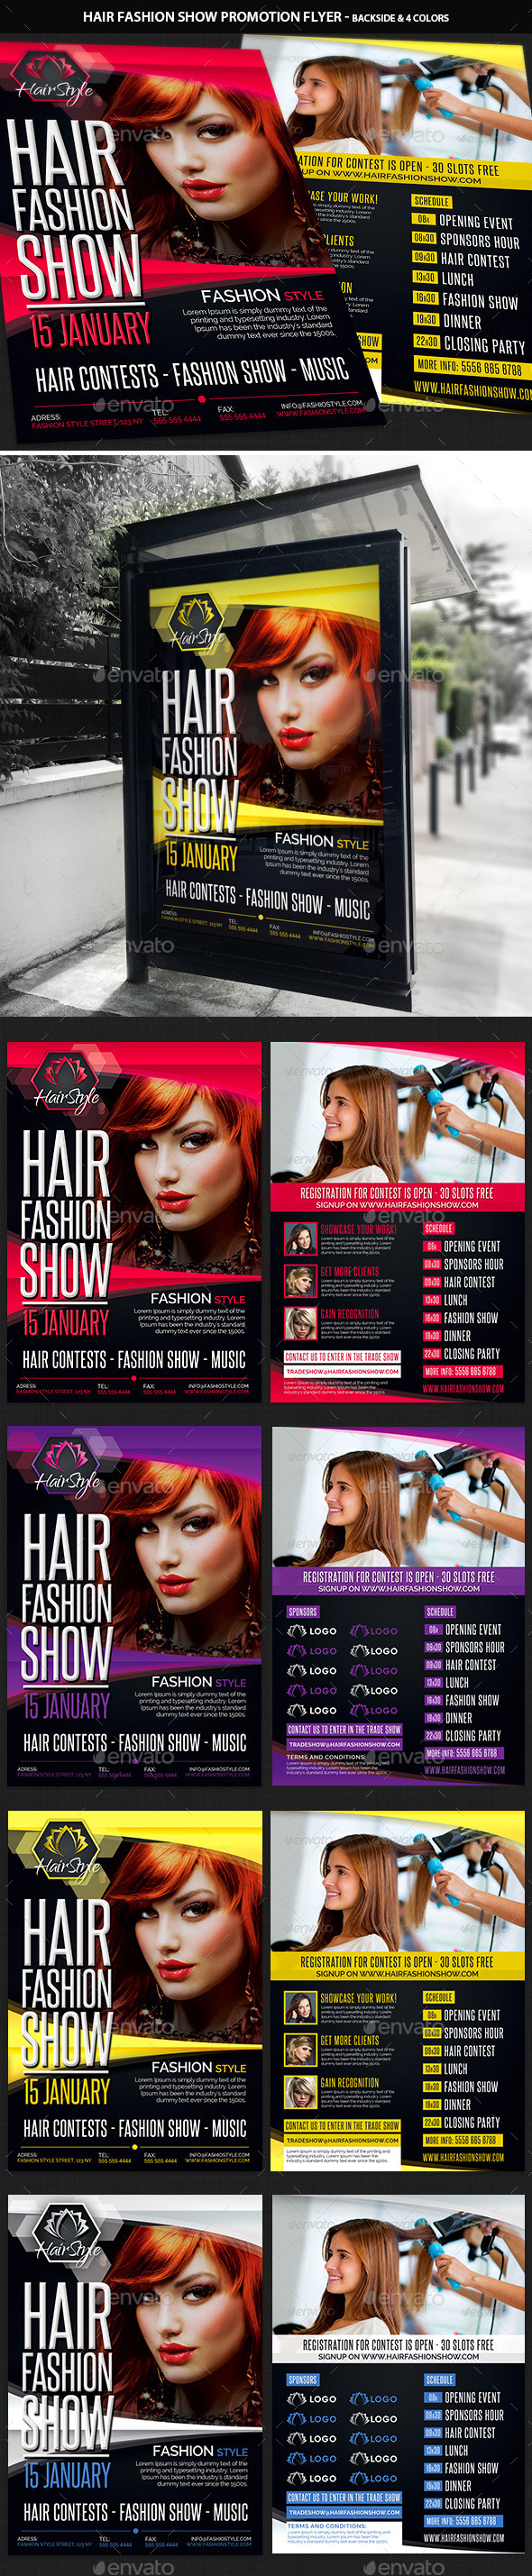 Hair Fashion Show Promotion Flyer